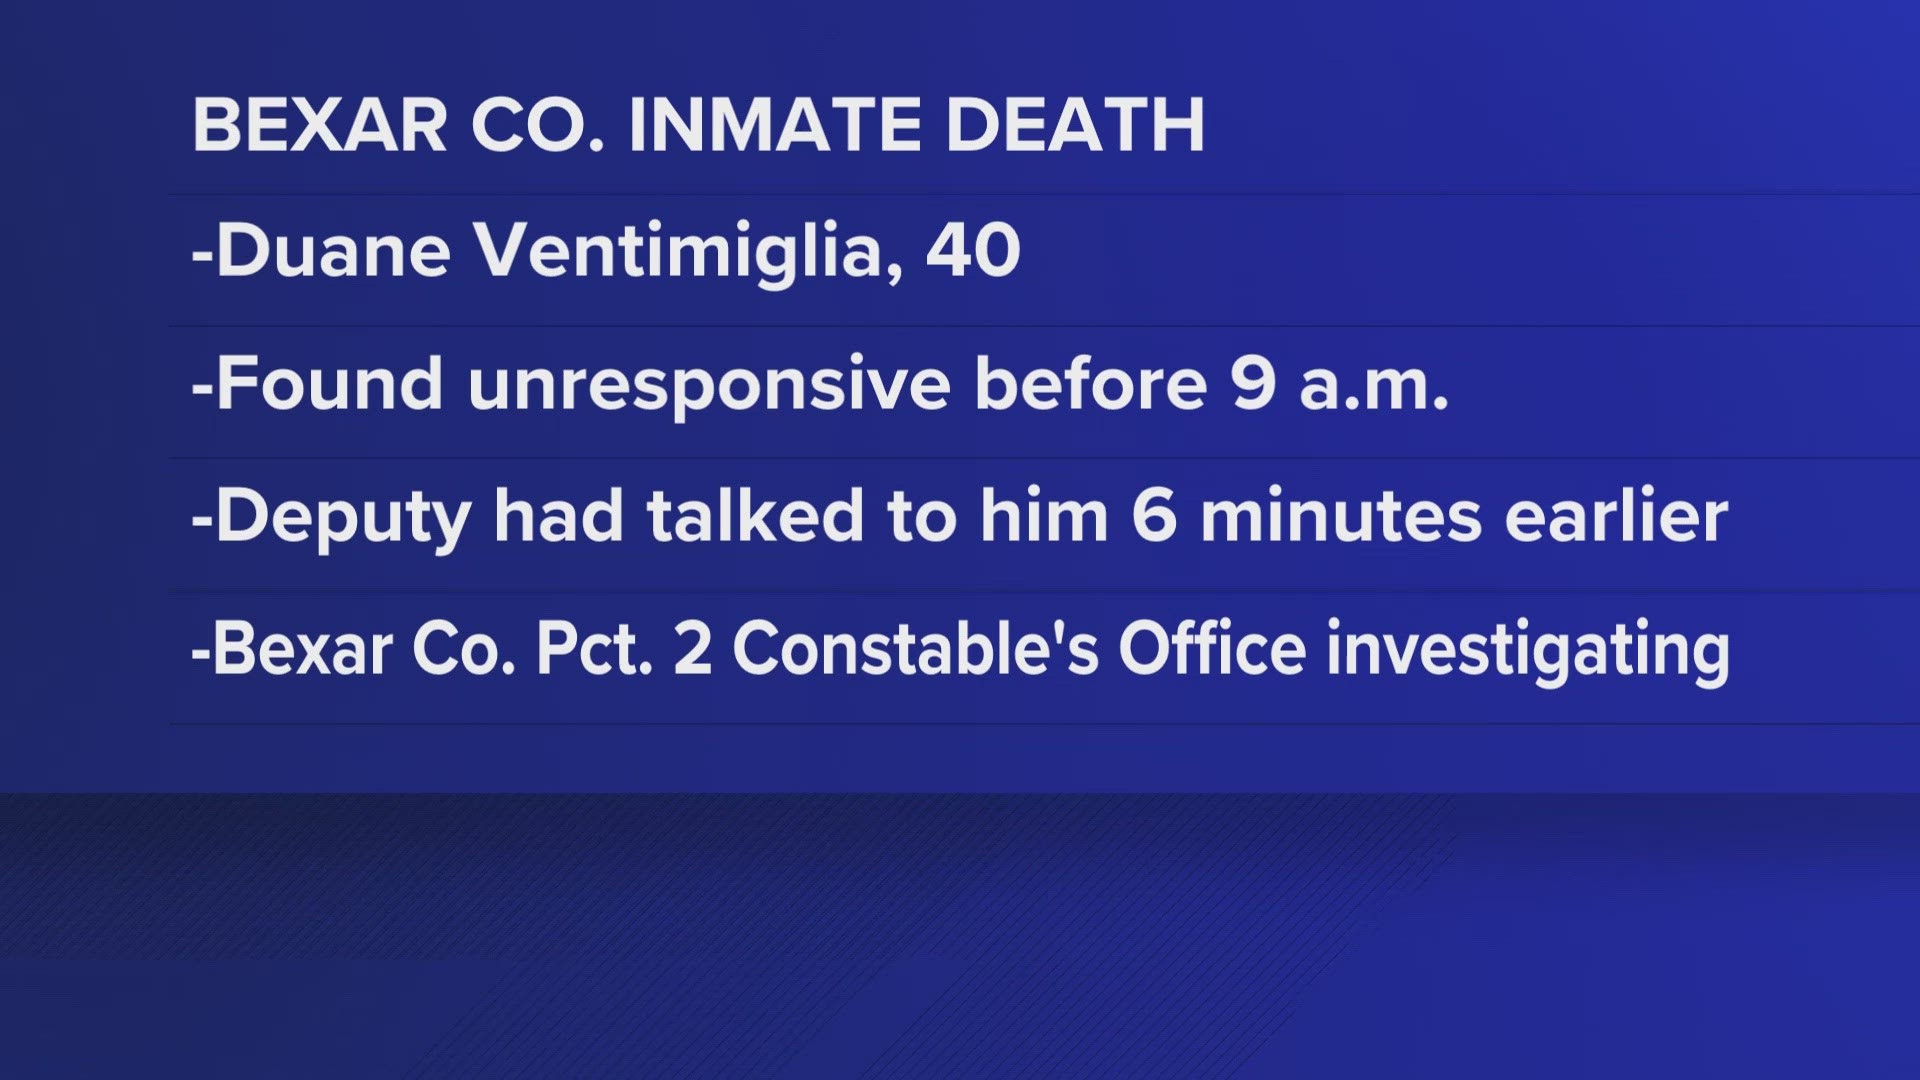 Duane Ventimiglia's bond had been reduced to $25 just one day before officials say he died.